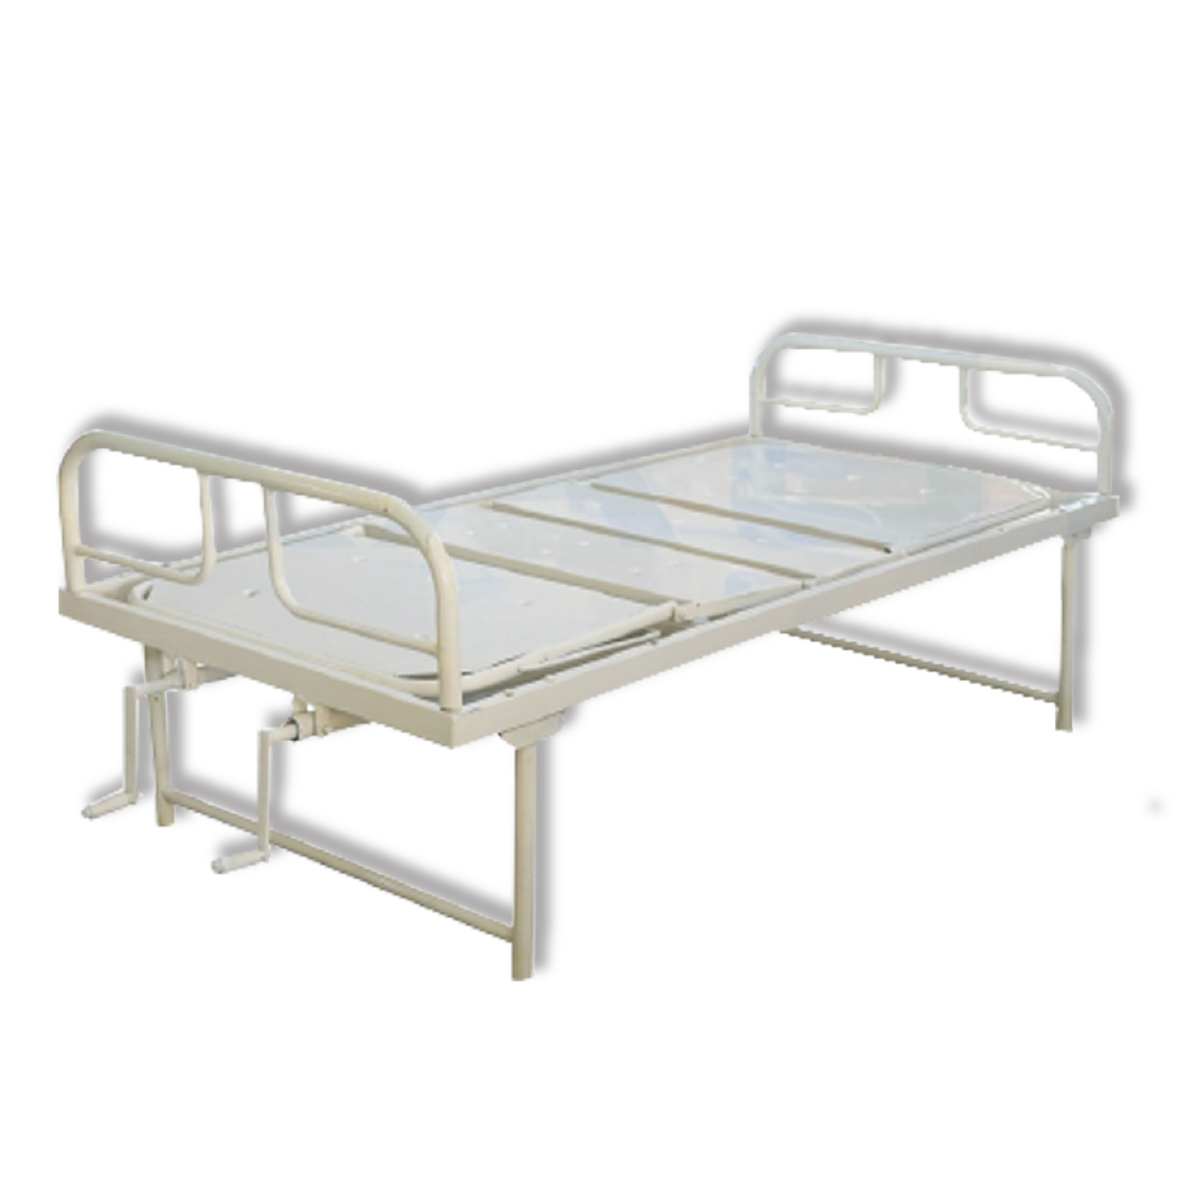 Four Function Manual ICU Bed